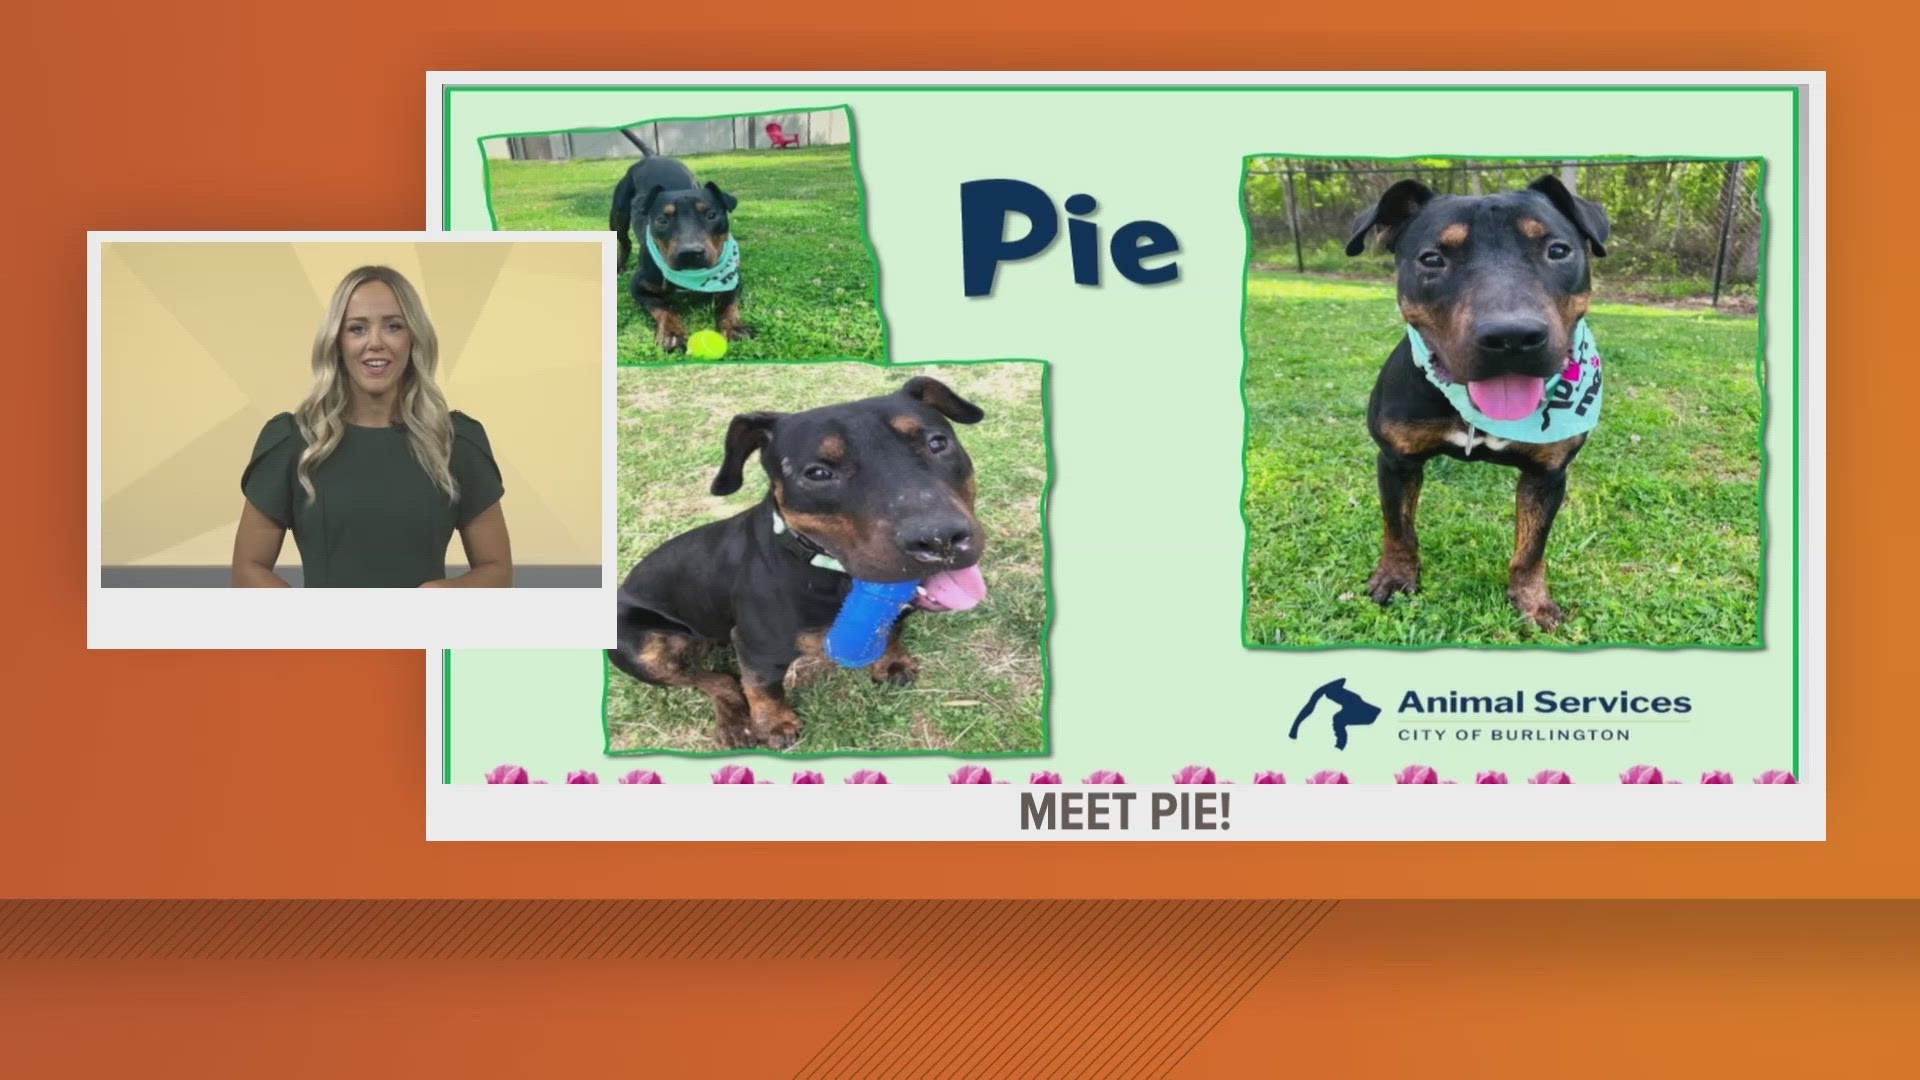 Pie is a sweet, playful boy looking for his forever home.